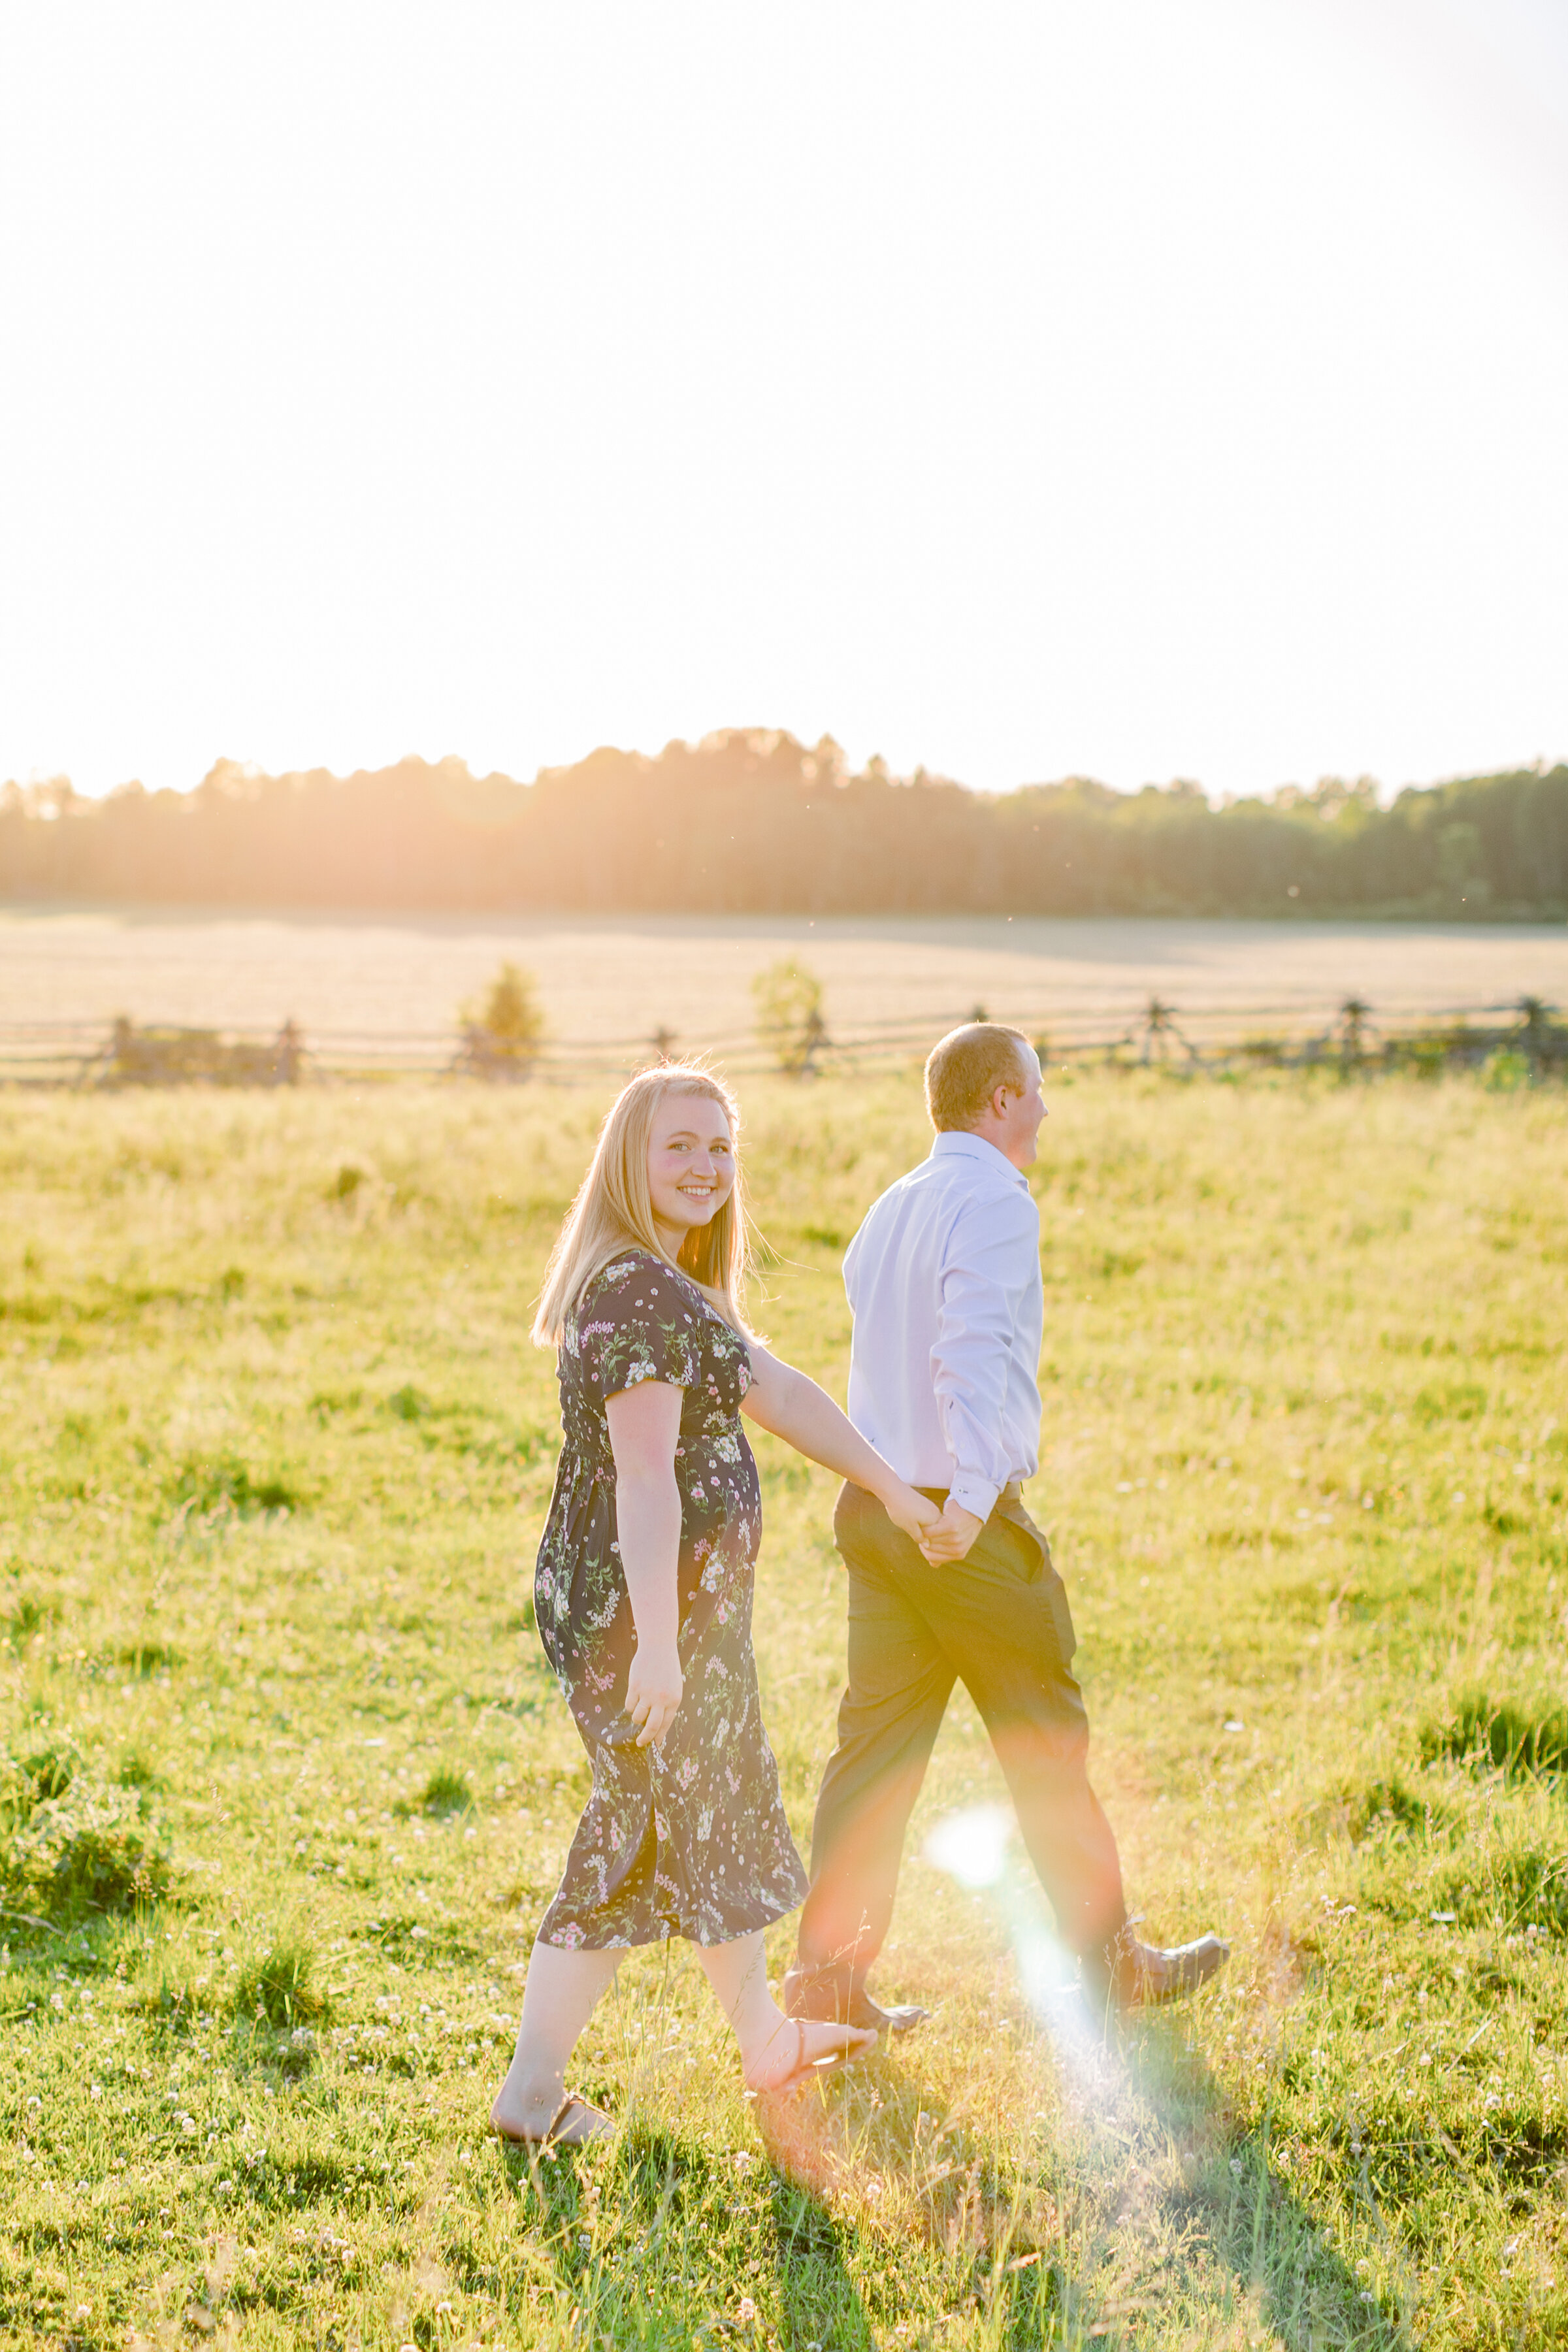  A couple walk through the glowing field in a golden hour engagement photo shoot by professional photographer Chelsea Mason. Couple walking pose inspiration ideas and goals summer engagement session inspiration ideas and goals outdoor engagement sess